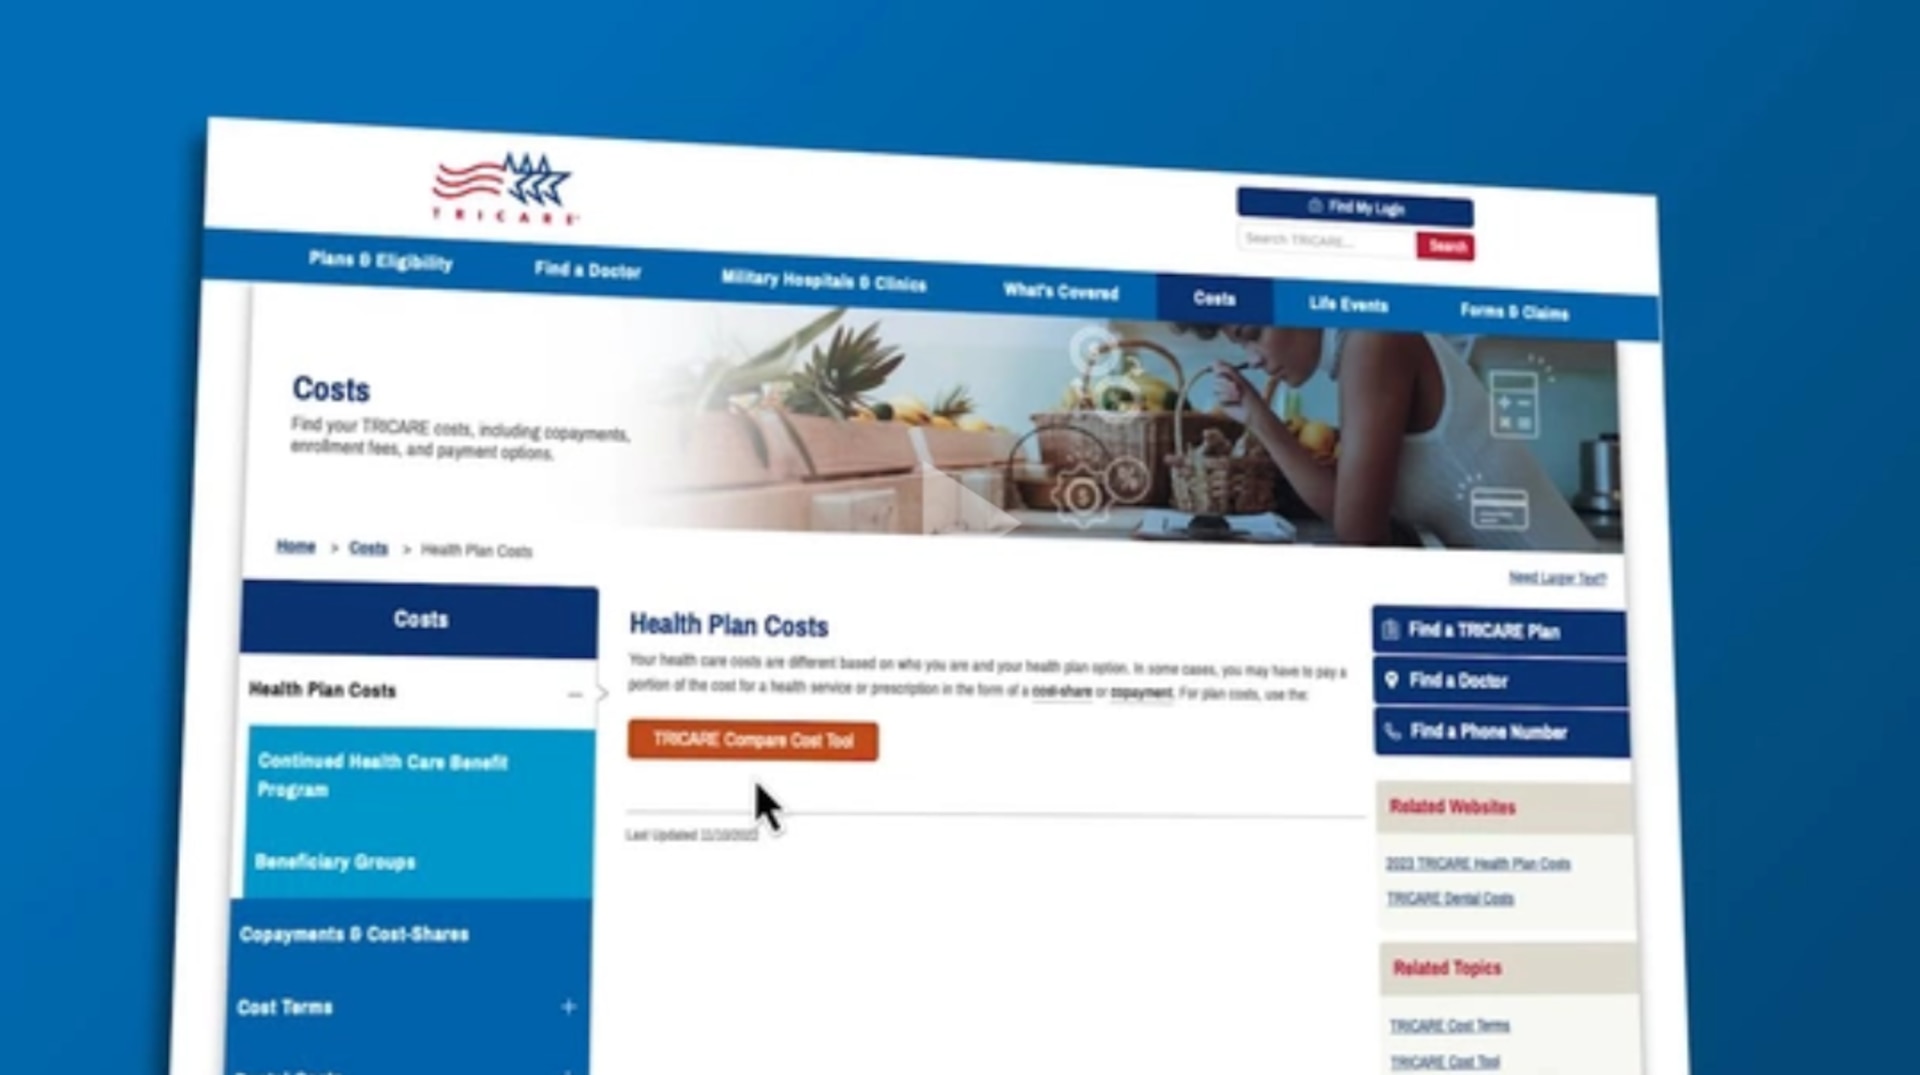 What's on the TRICARE Cost Page Video Image Cover